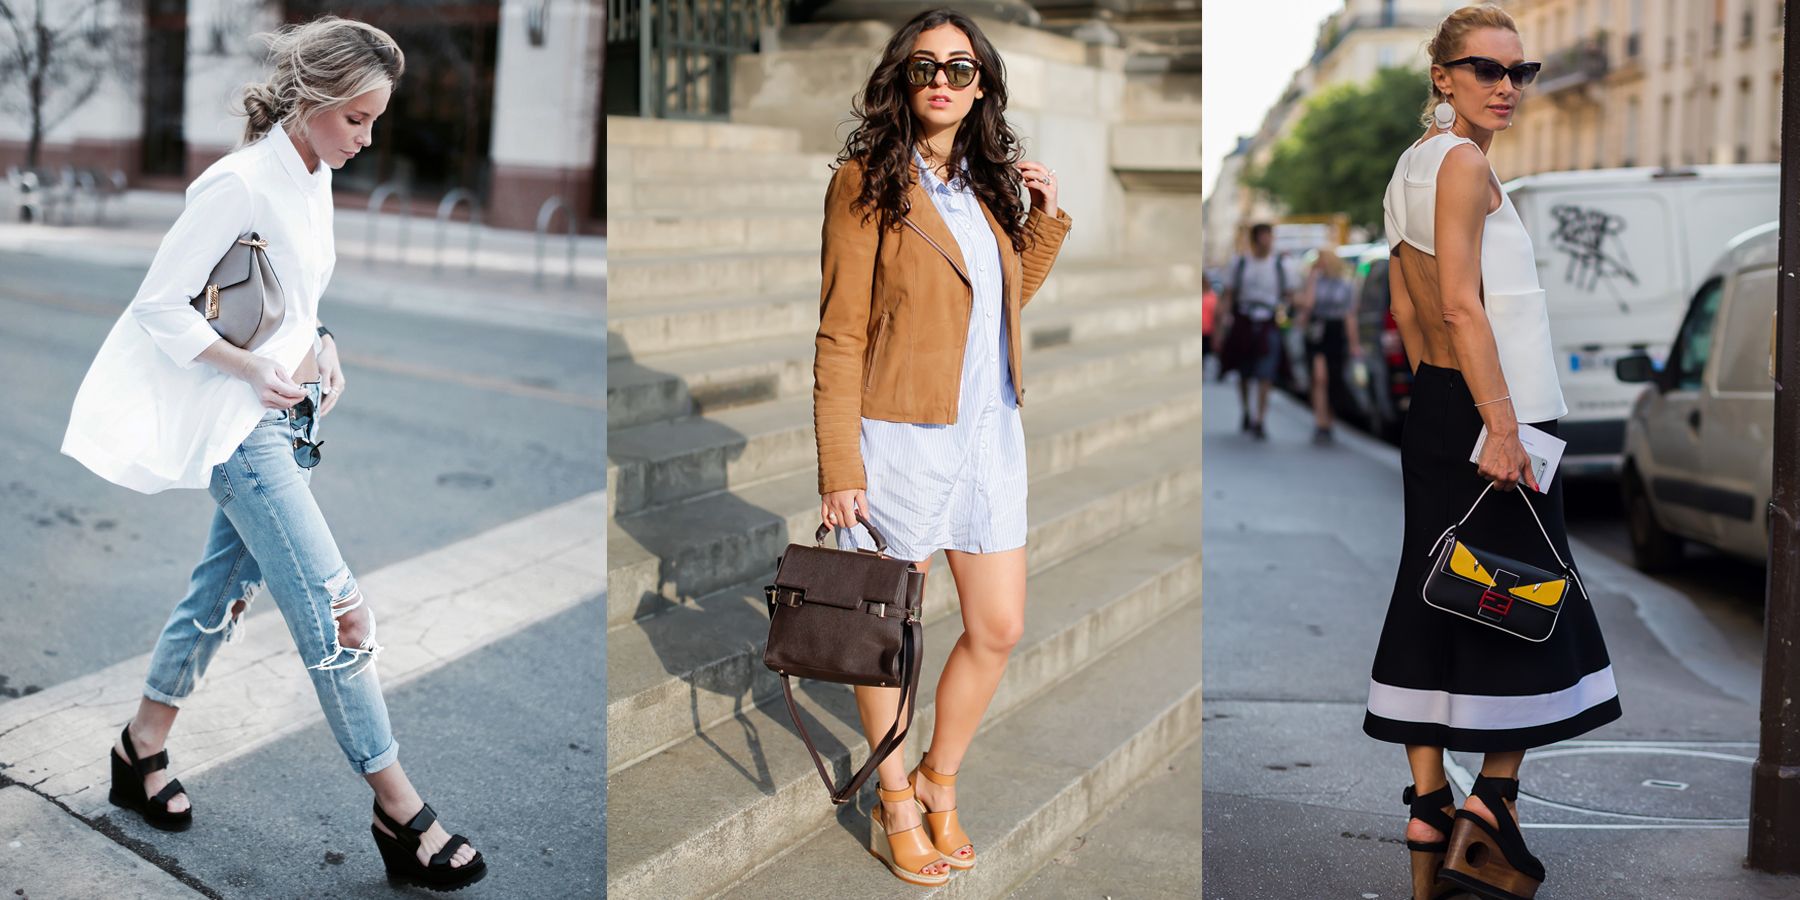 These 5 Tricks Will Make You Super Comfortable and Comfortable Wearing Heels All Day!